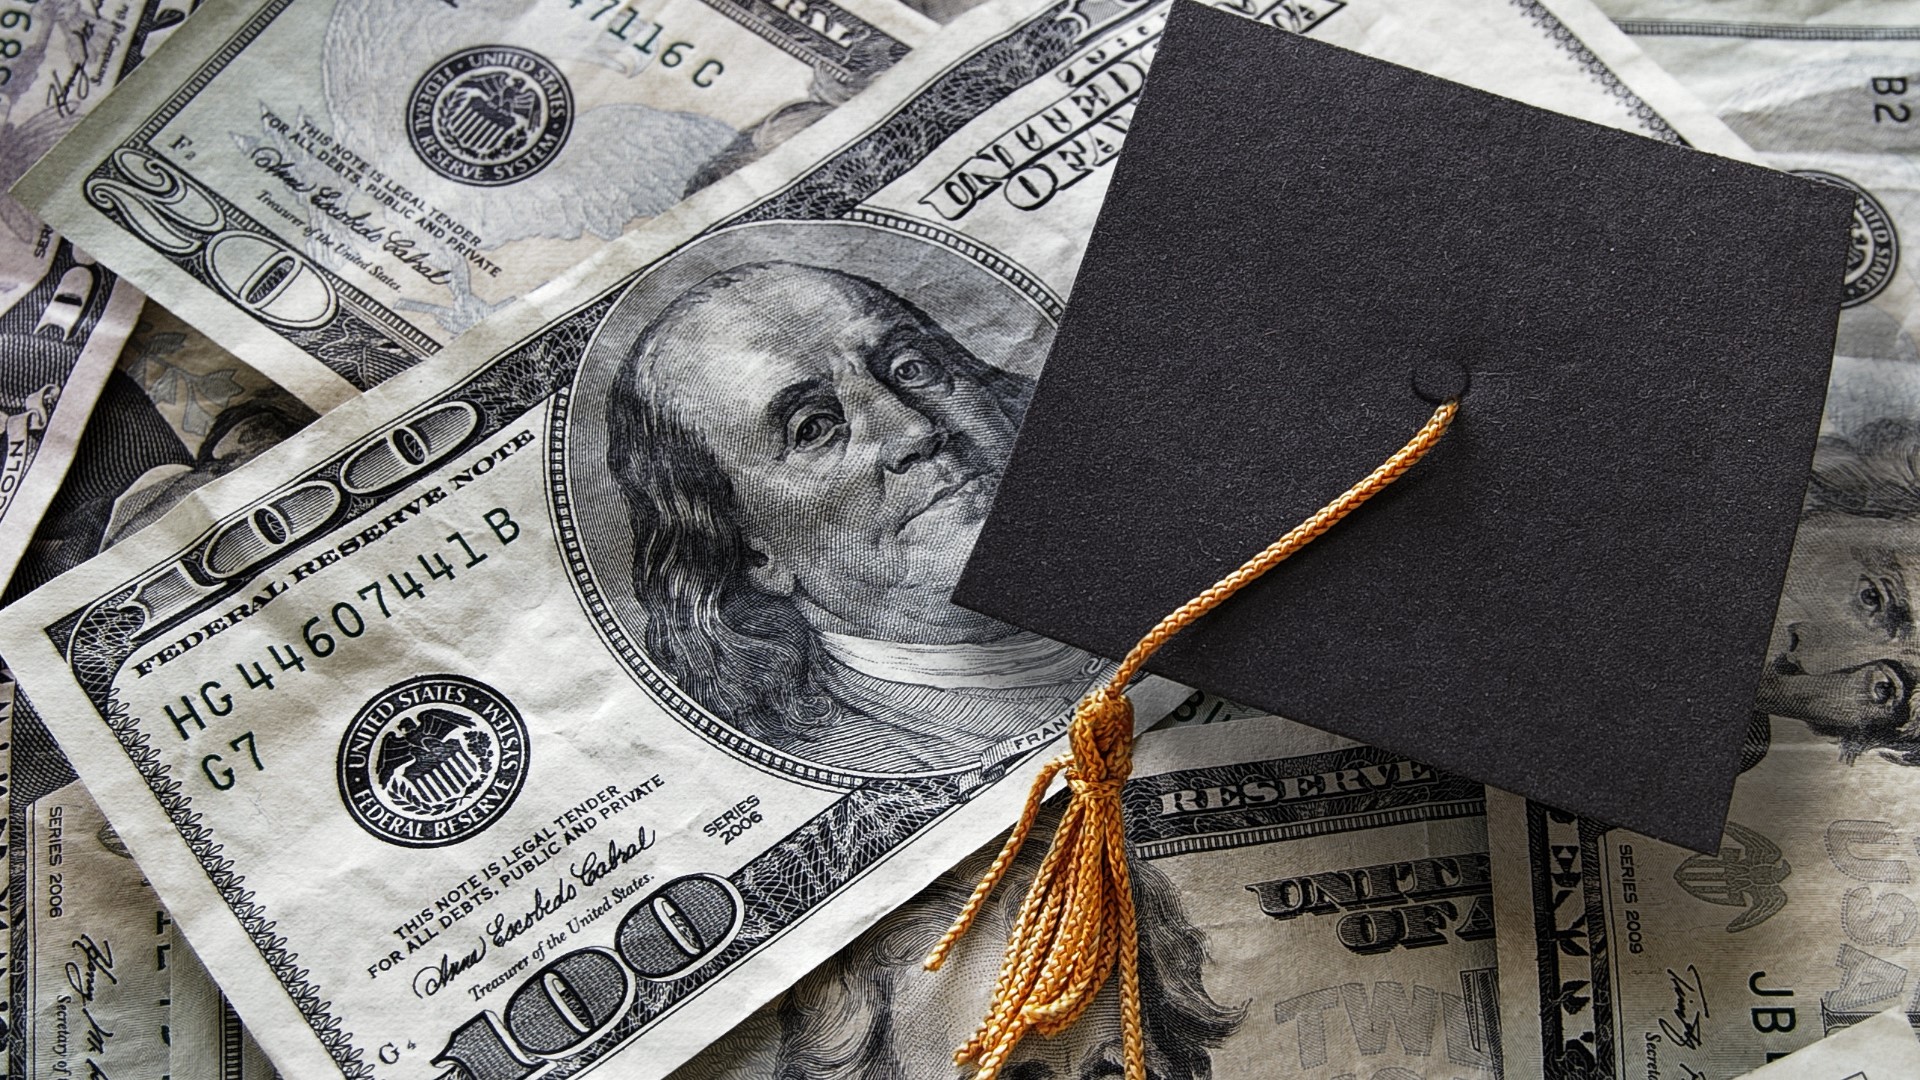 The Biden administration has extended the pause on student loan payments again. The deadline was supposed to be May 1 -- now borrowers have another four months.